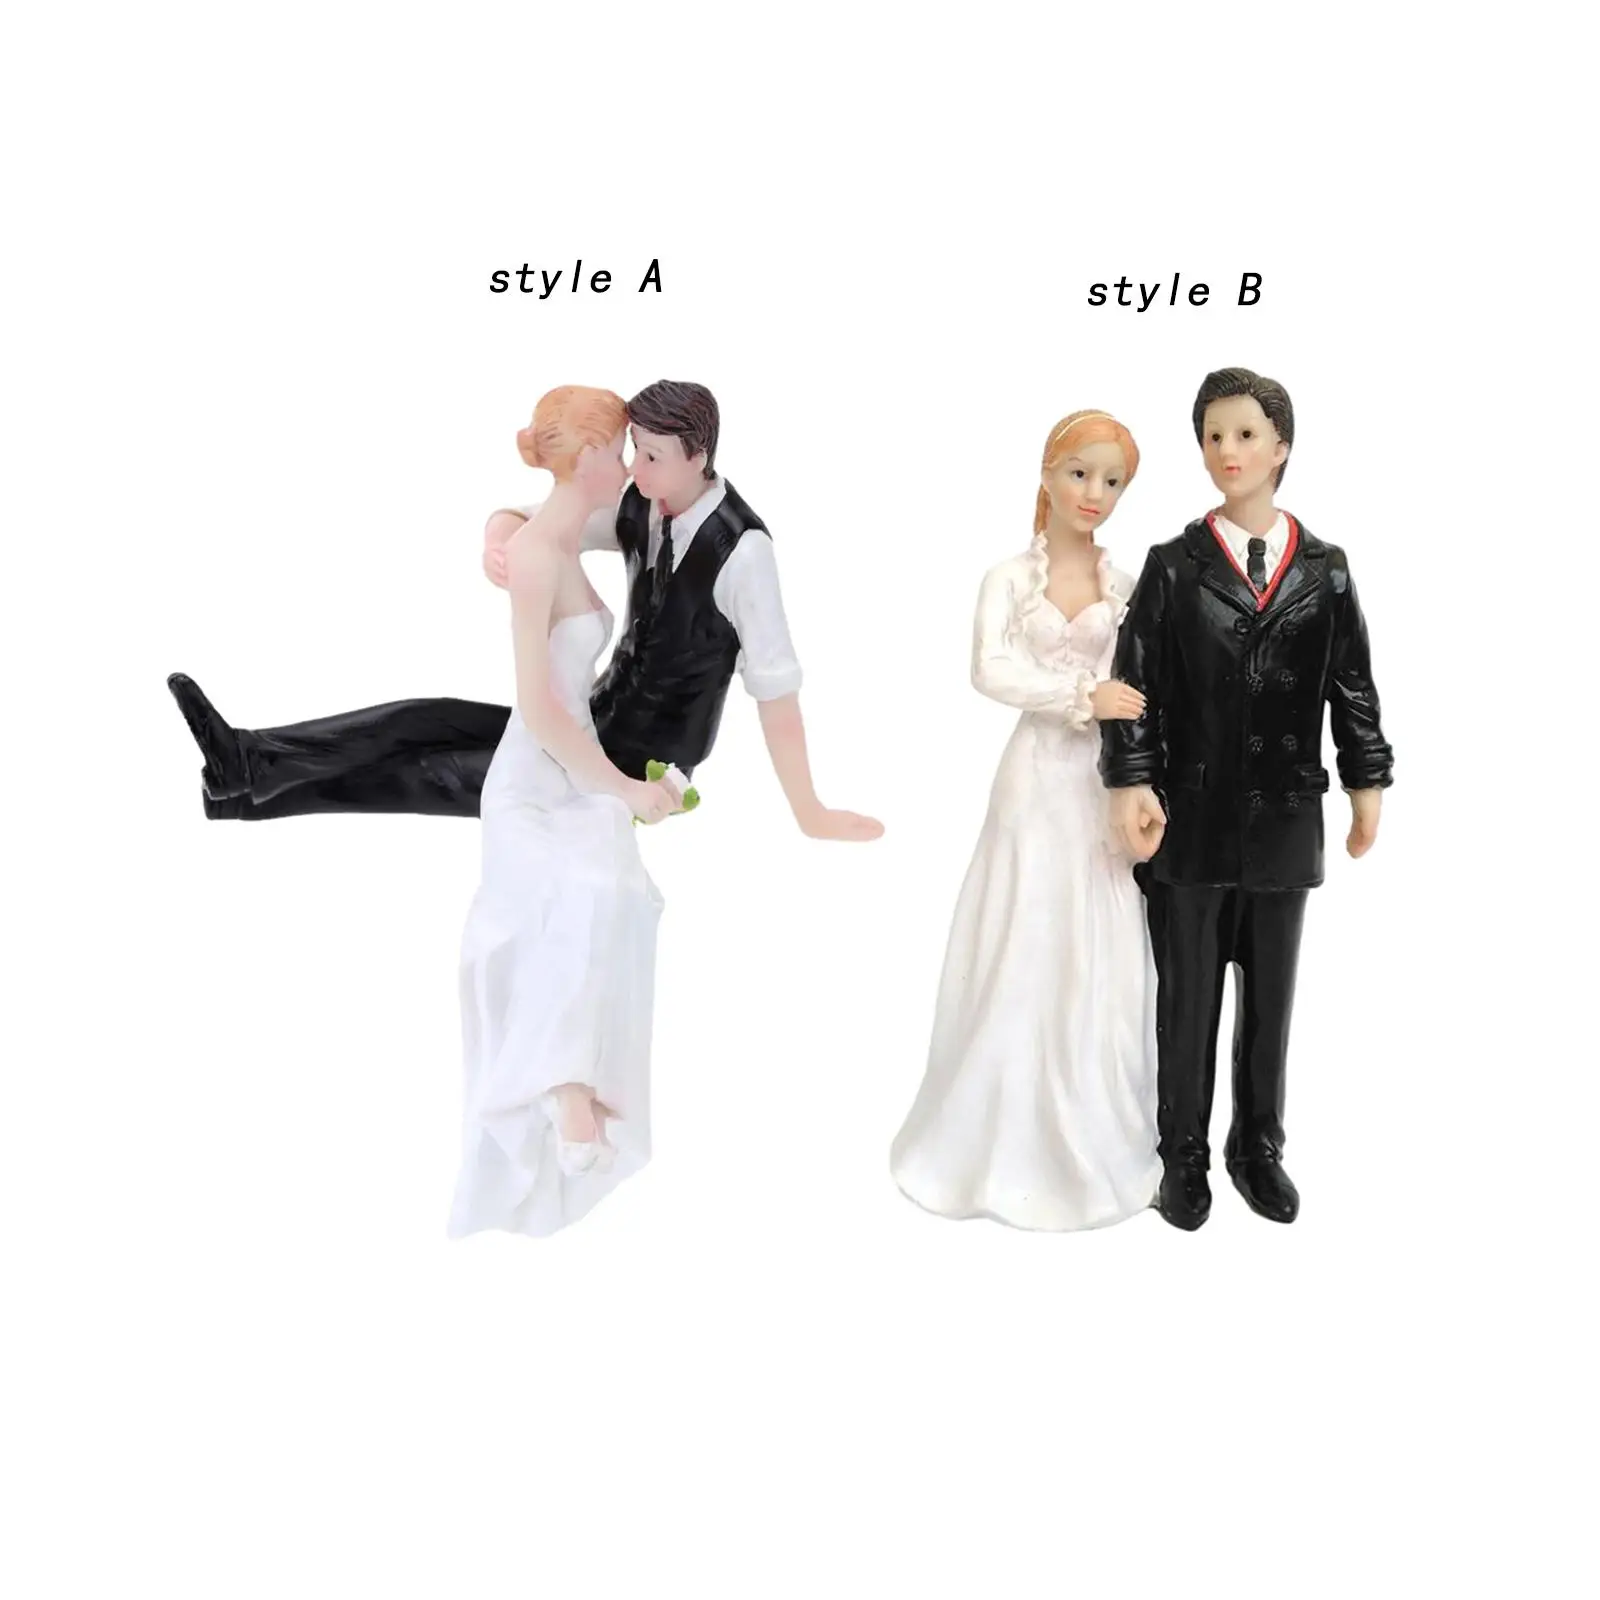 Wedding Cake Toppers Novelty Bride and Groom Figurines for Anniversary Ceremony Bridal Showers Table Centerpiece Party Supplies